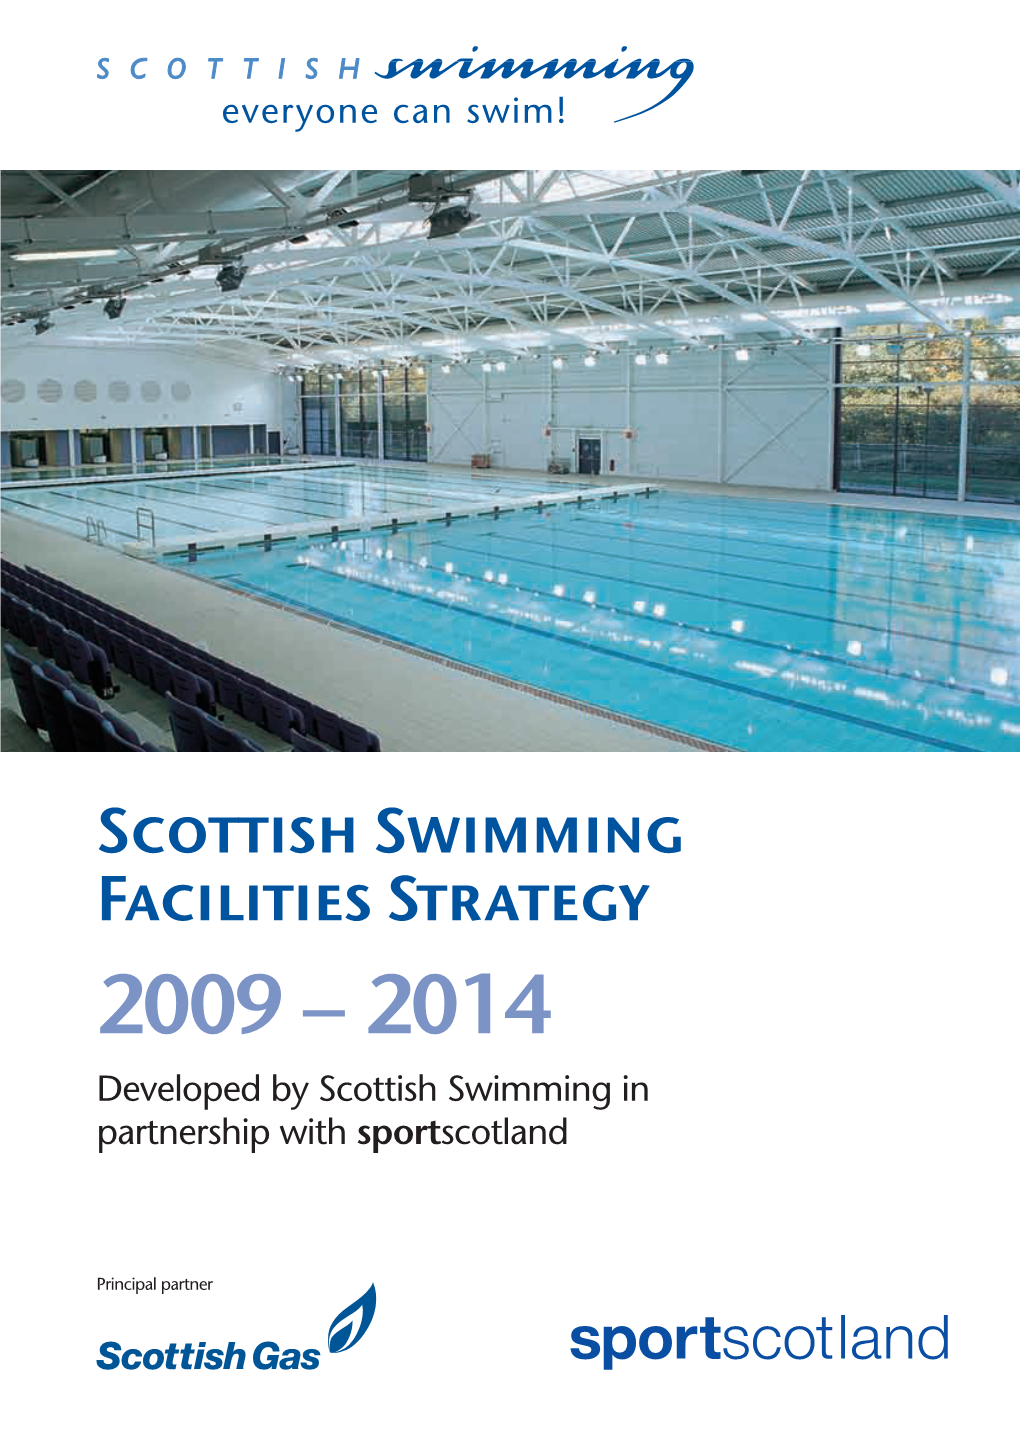 Scottish Swimming Facilities Strategy 2009 – 2014 Developed by Scottish Swimming in Partnership with Sportscotland